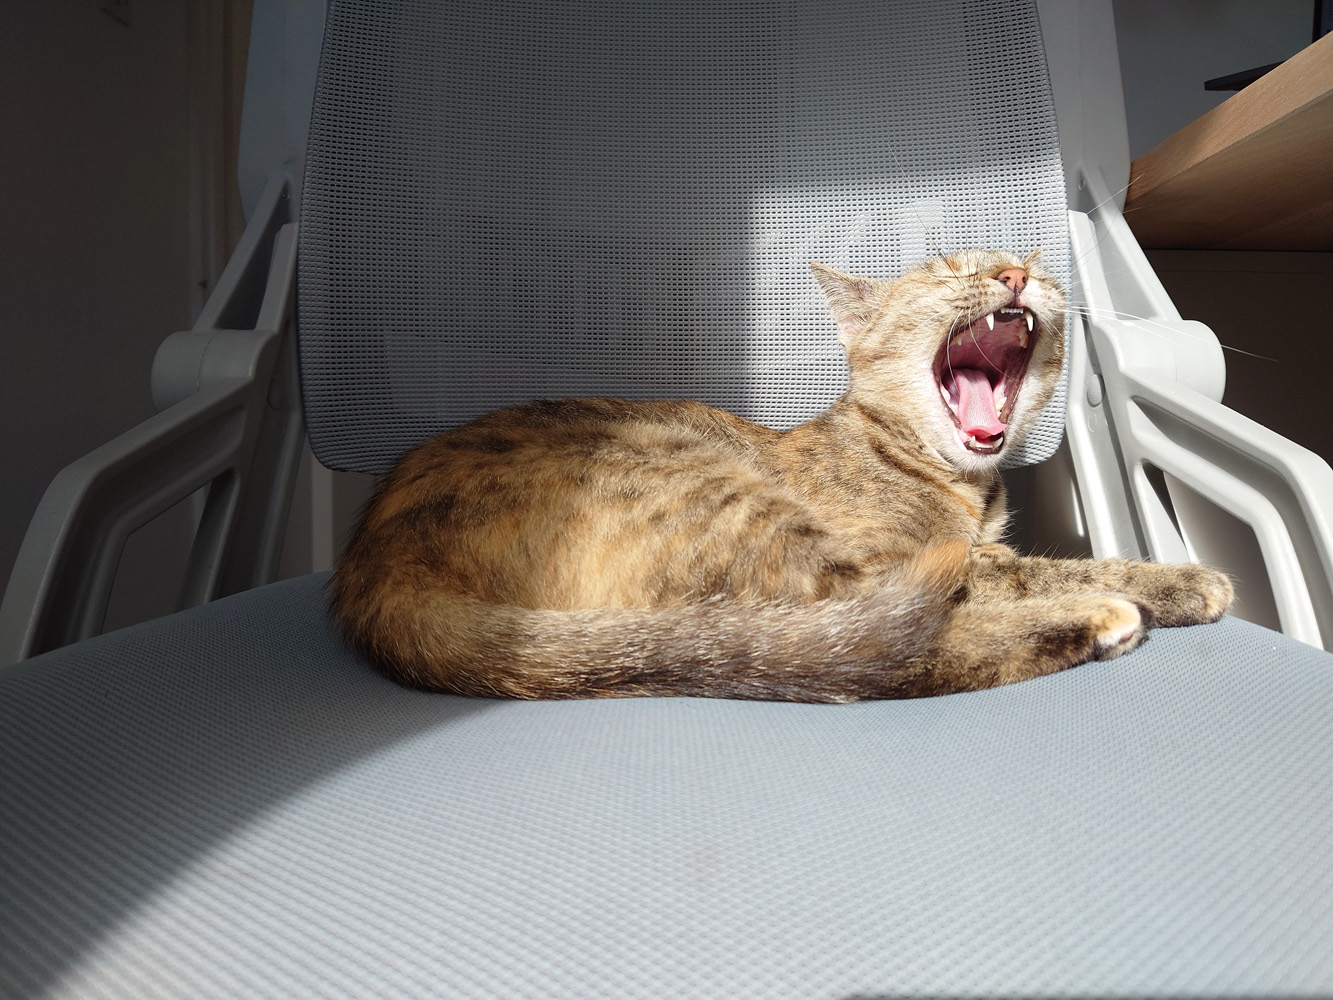 Stuff Sony Xperia 1 IV camera samples fast tracking of cat yawning